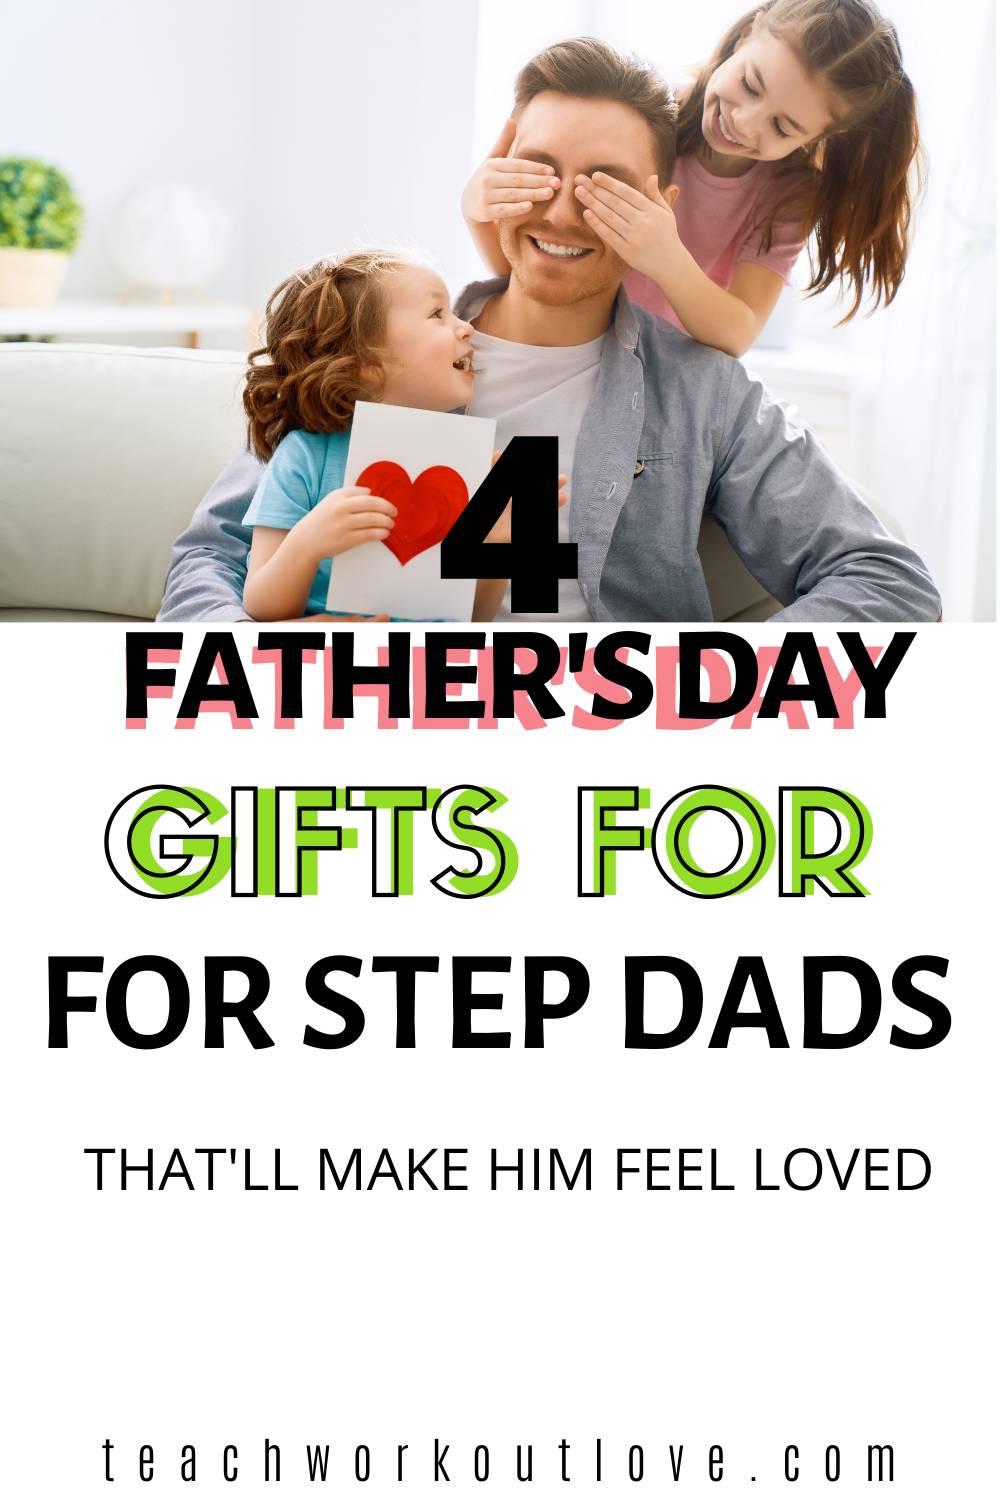 Looking for the best Father’s Day gift ideas for stepdads? We’ve put together a few favourite ideas that are sure to make him feel loved this Father’s Day!